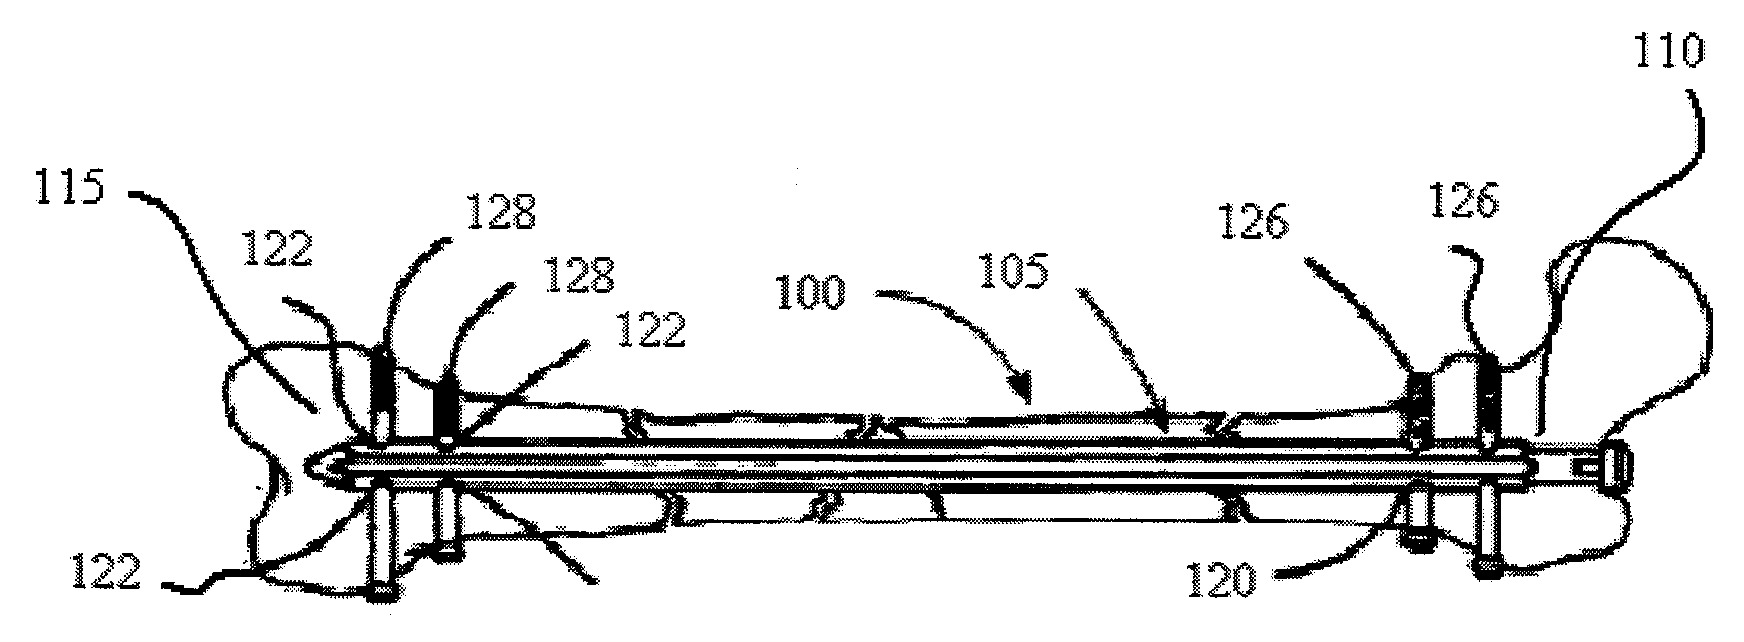 System and method for securing surgical implant